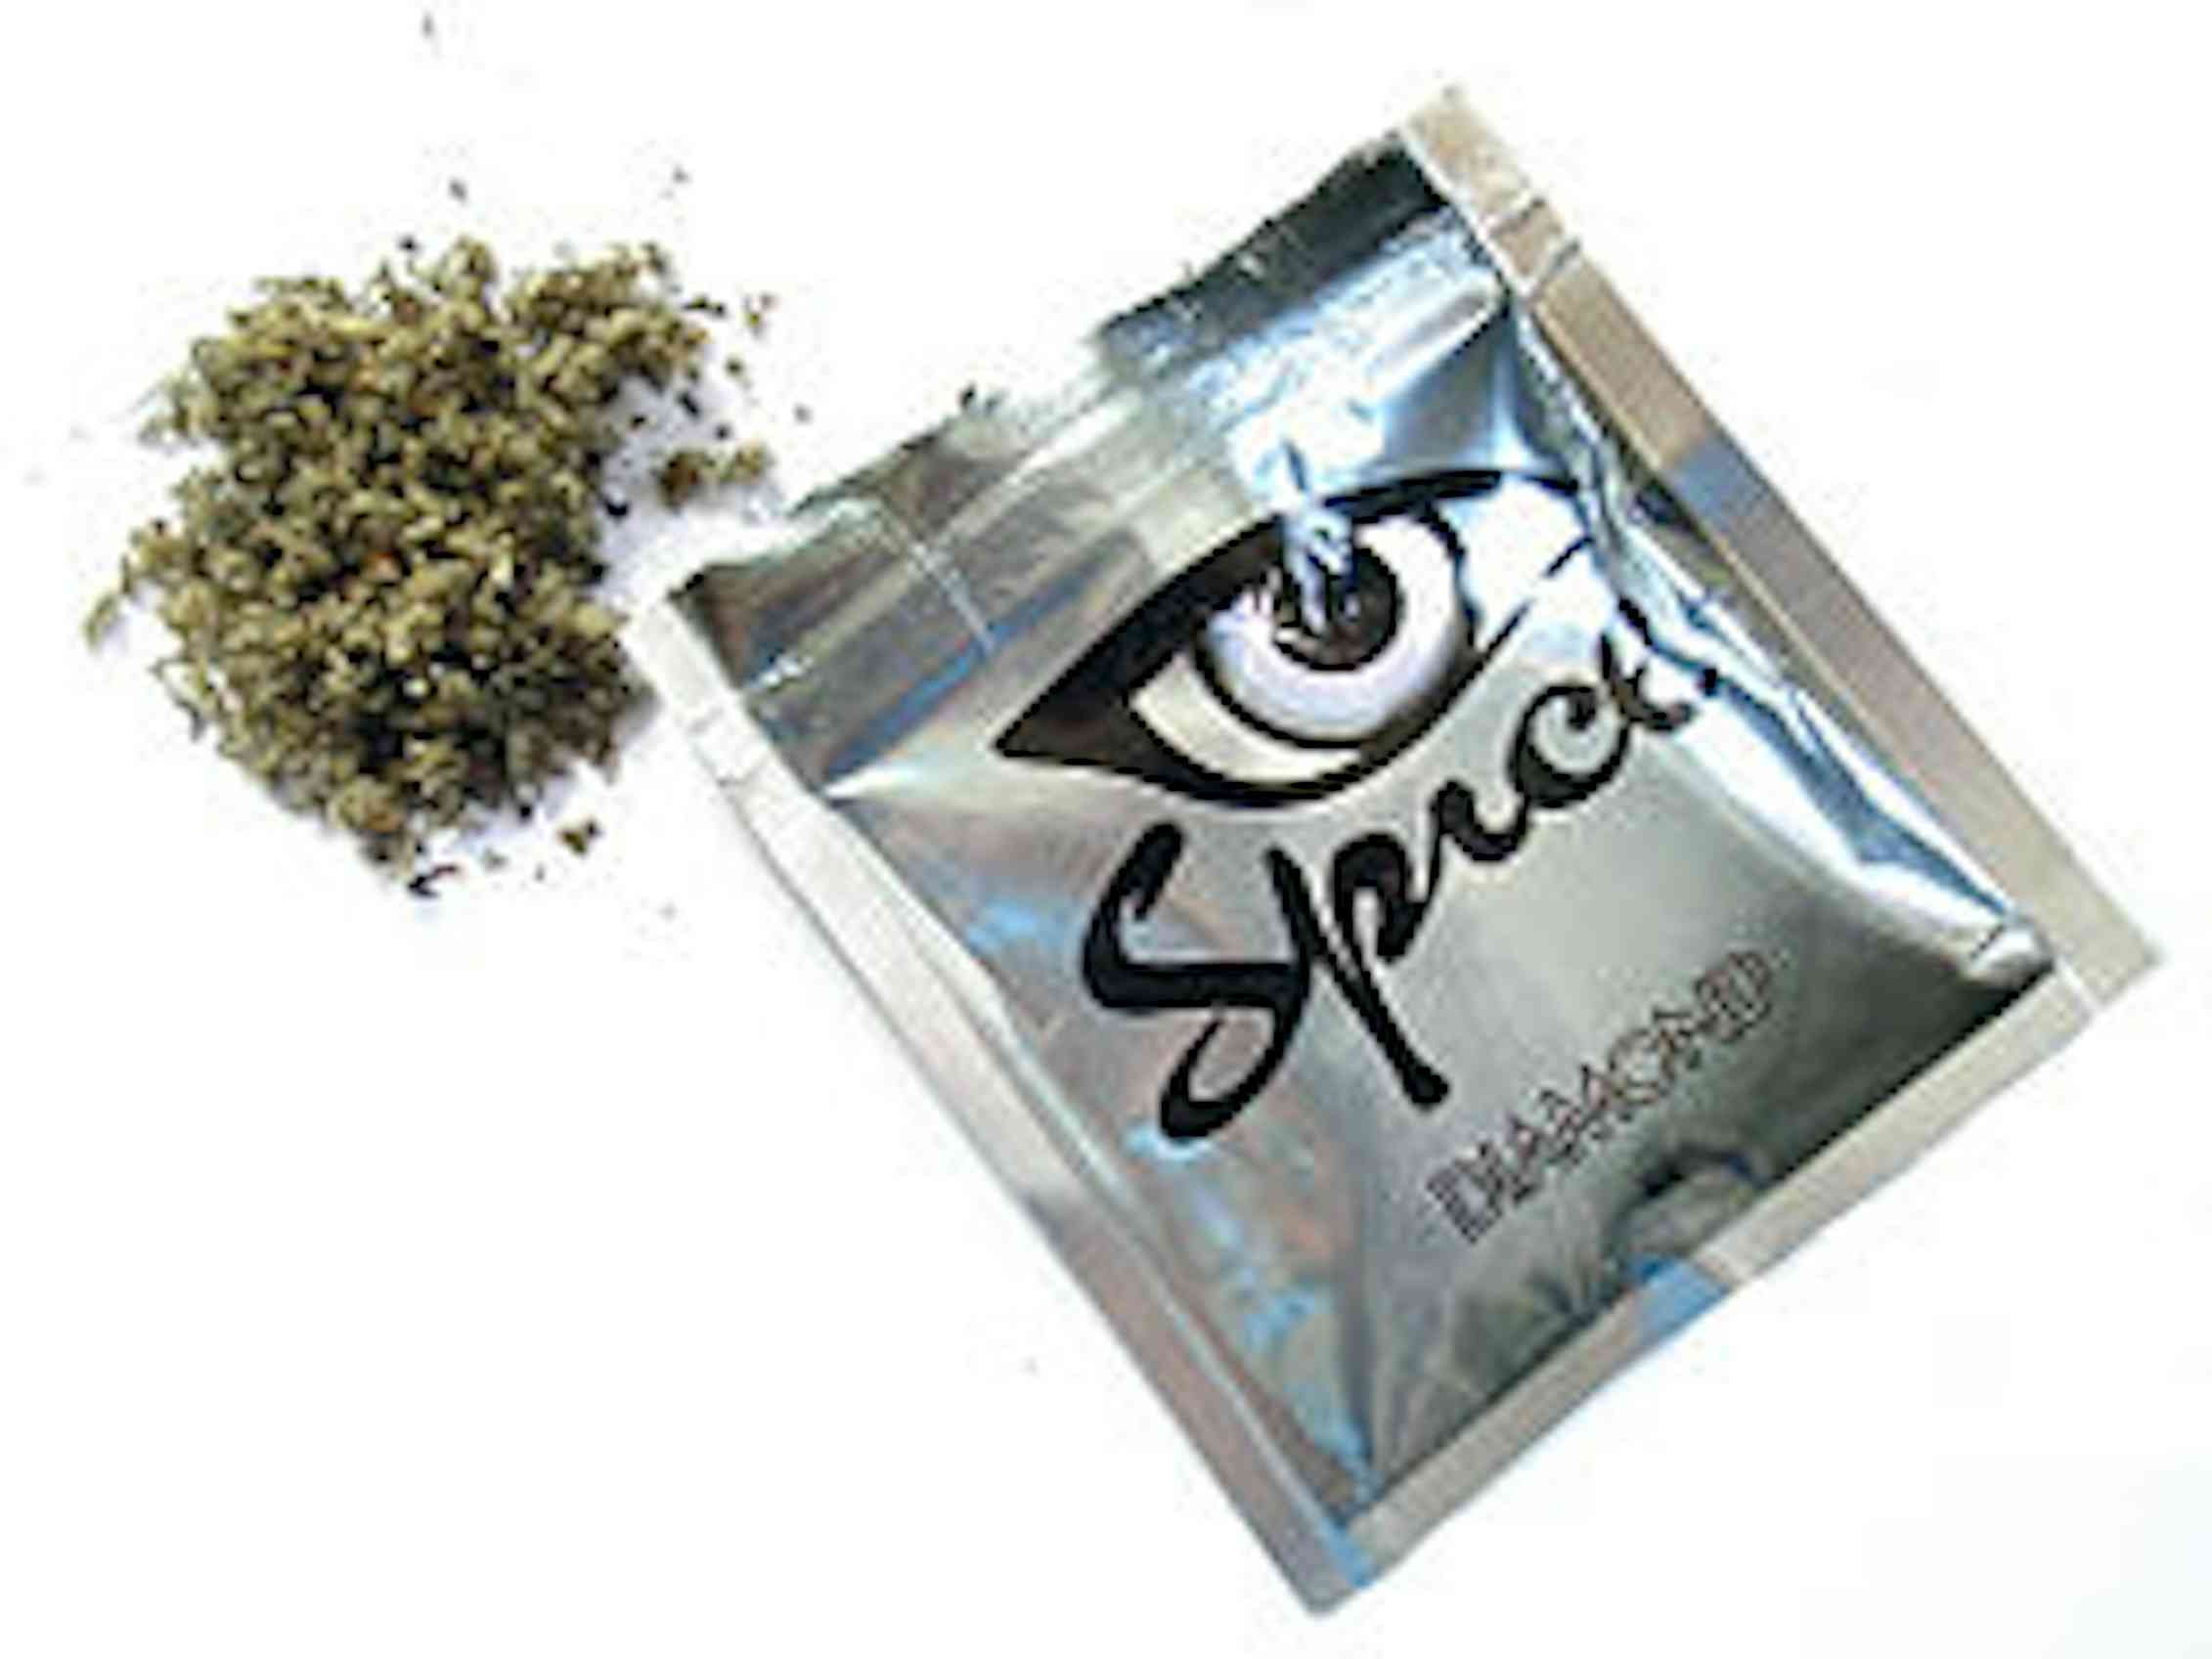 Legal Highs A Look At The Growing Use Of Synthetic Drugs